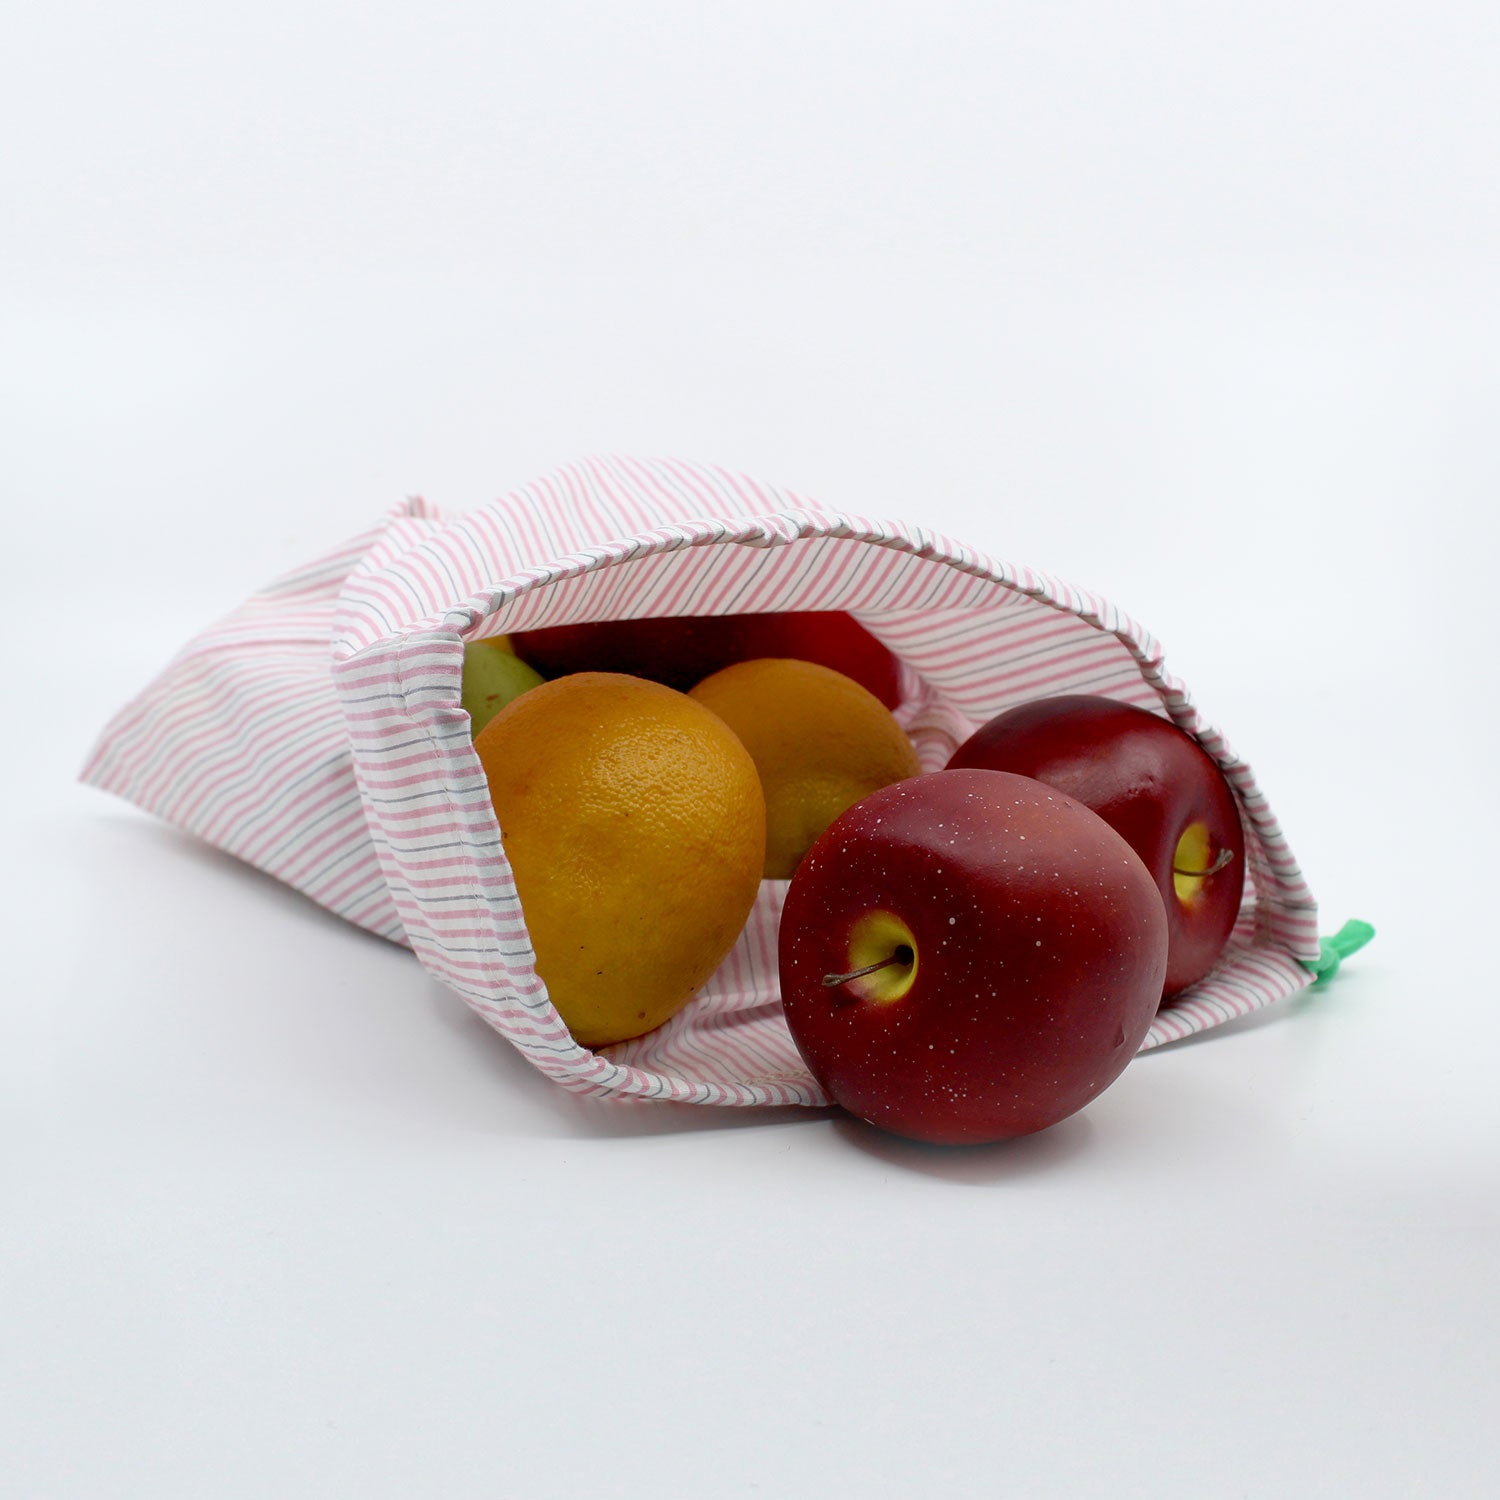 upcycled produce bag with fruit spilling out